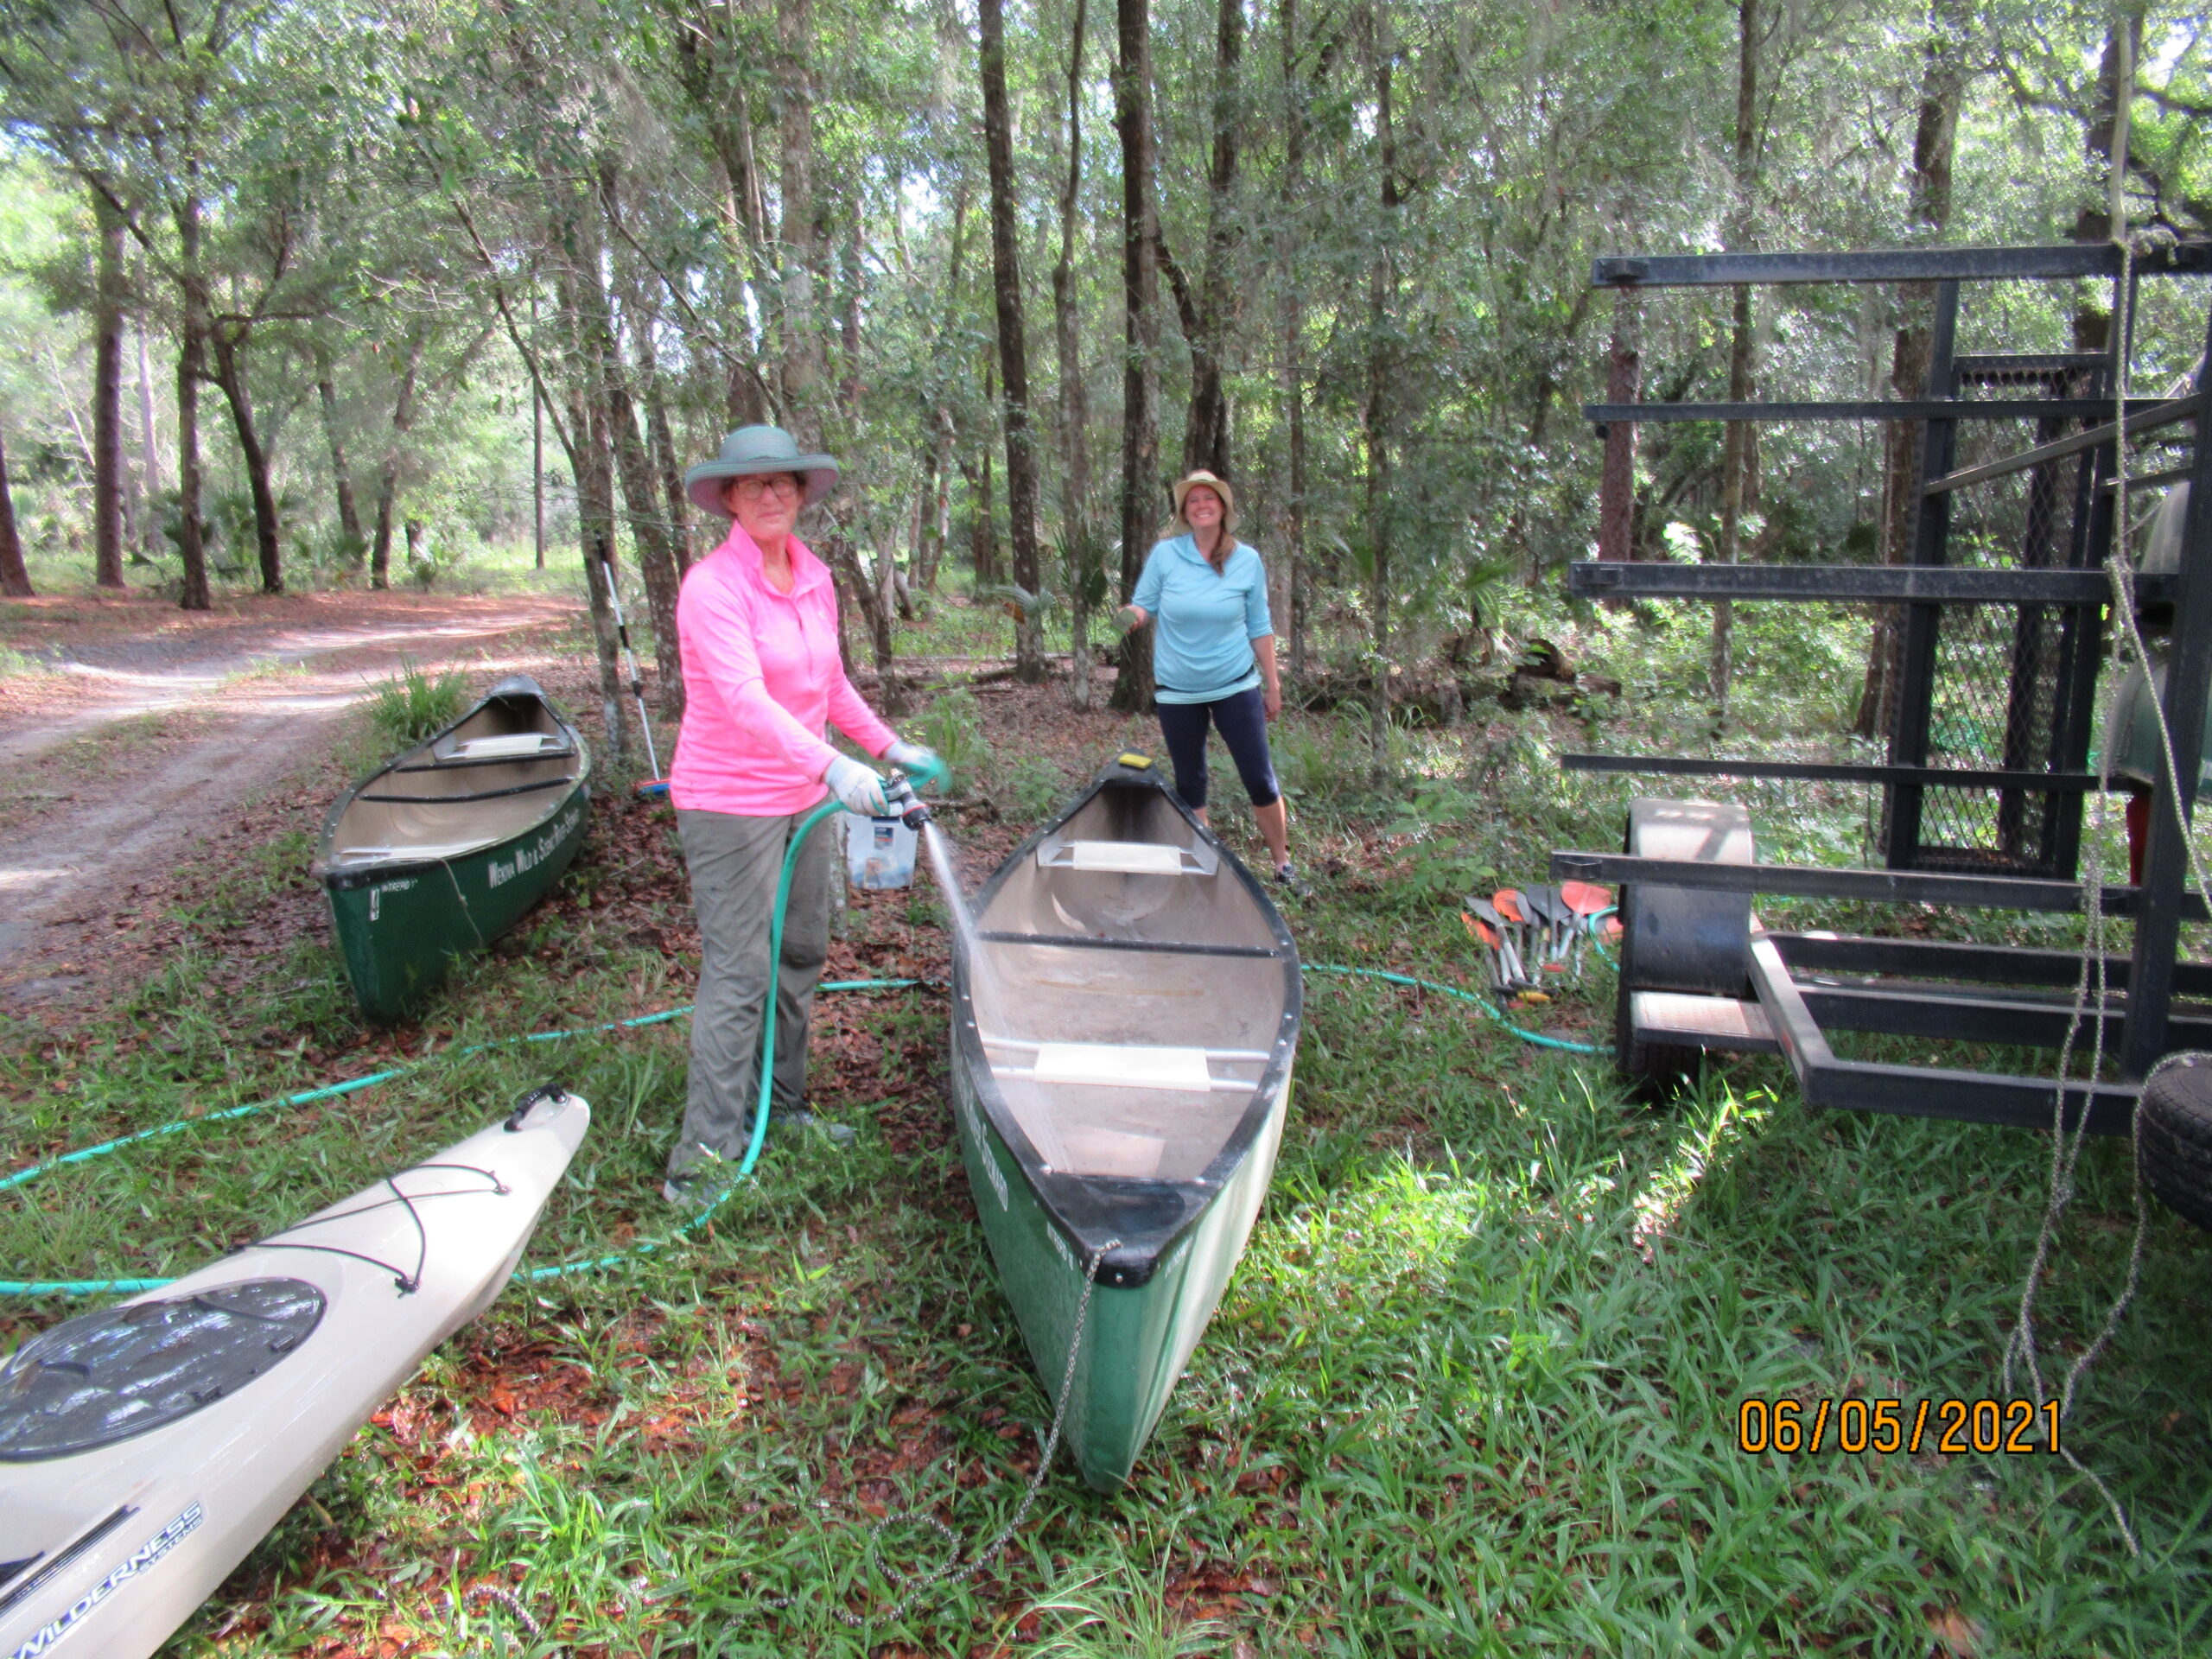 Two people stand next to a canoe they are cleaning